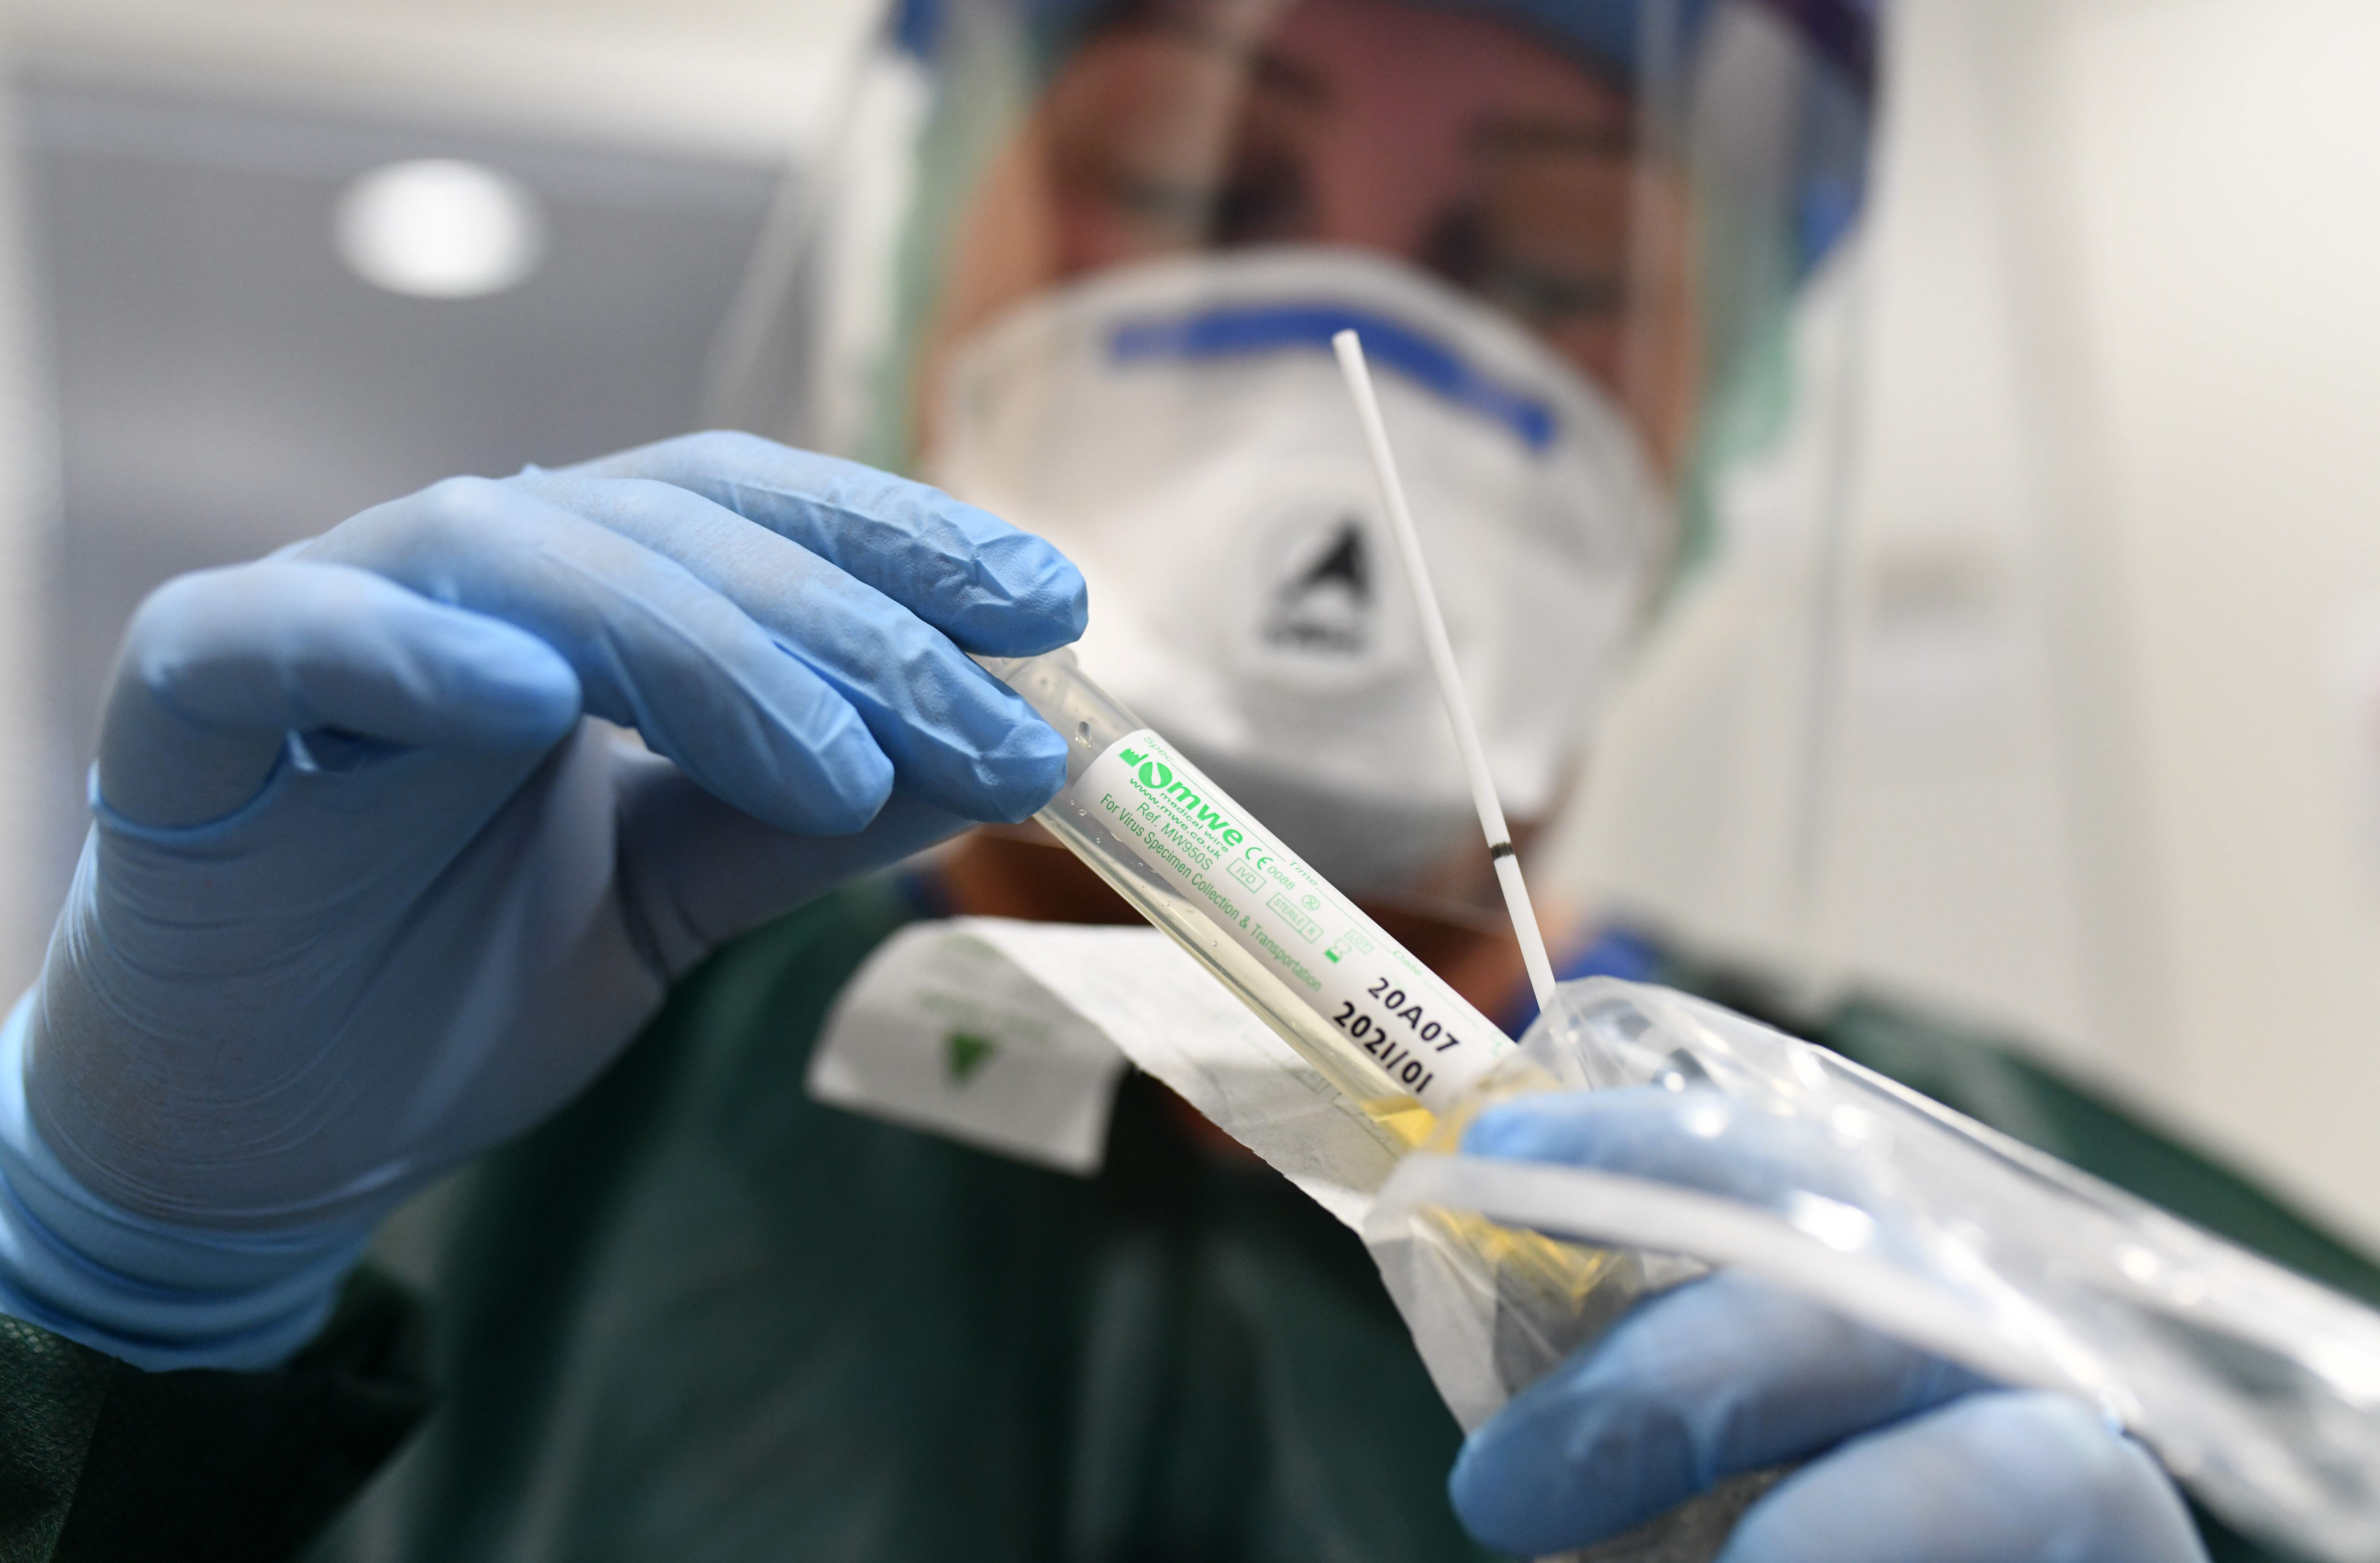 Nurse Canan Emcan shows a test kit for coronavirus samples at the isolation ward of the Uniklinikum Essen university hospital in Essen, western Germany. (Photo by INA FASSBENDER/AFP via Getty Images)